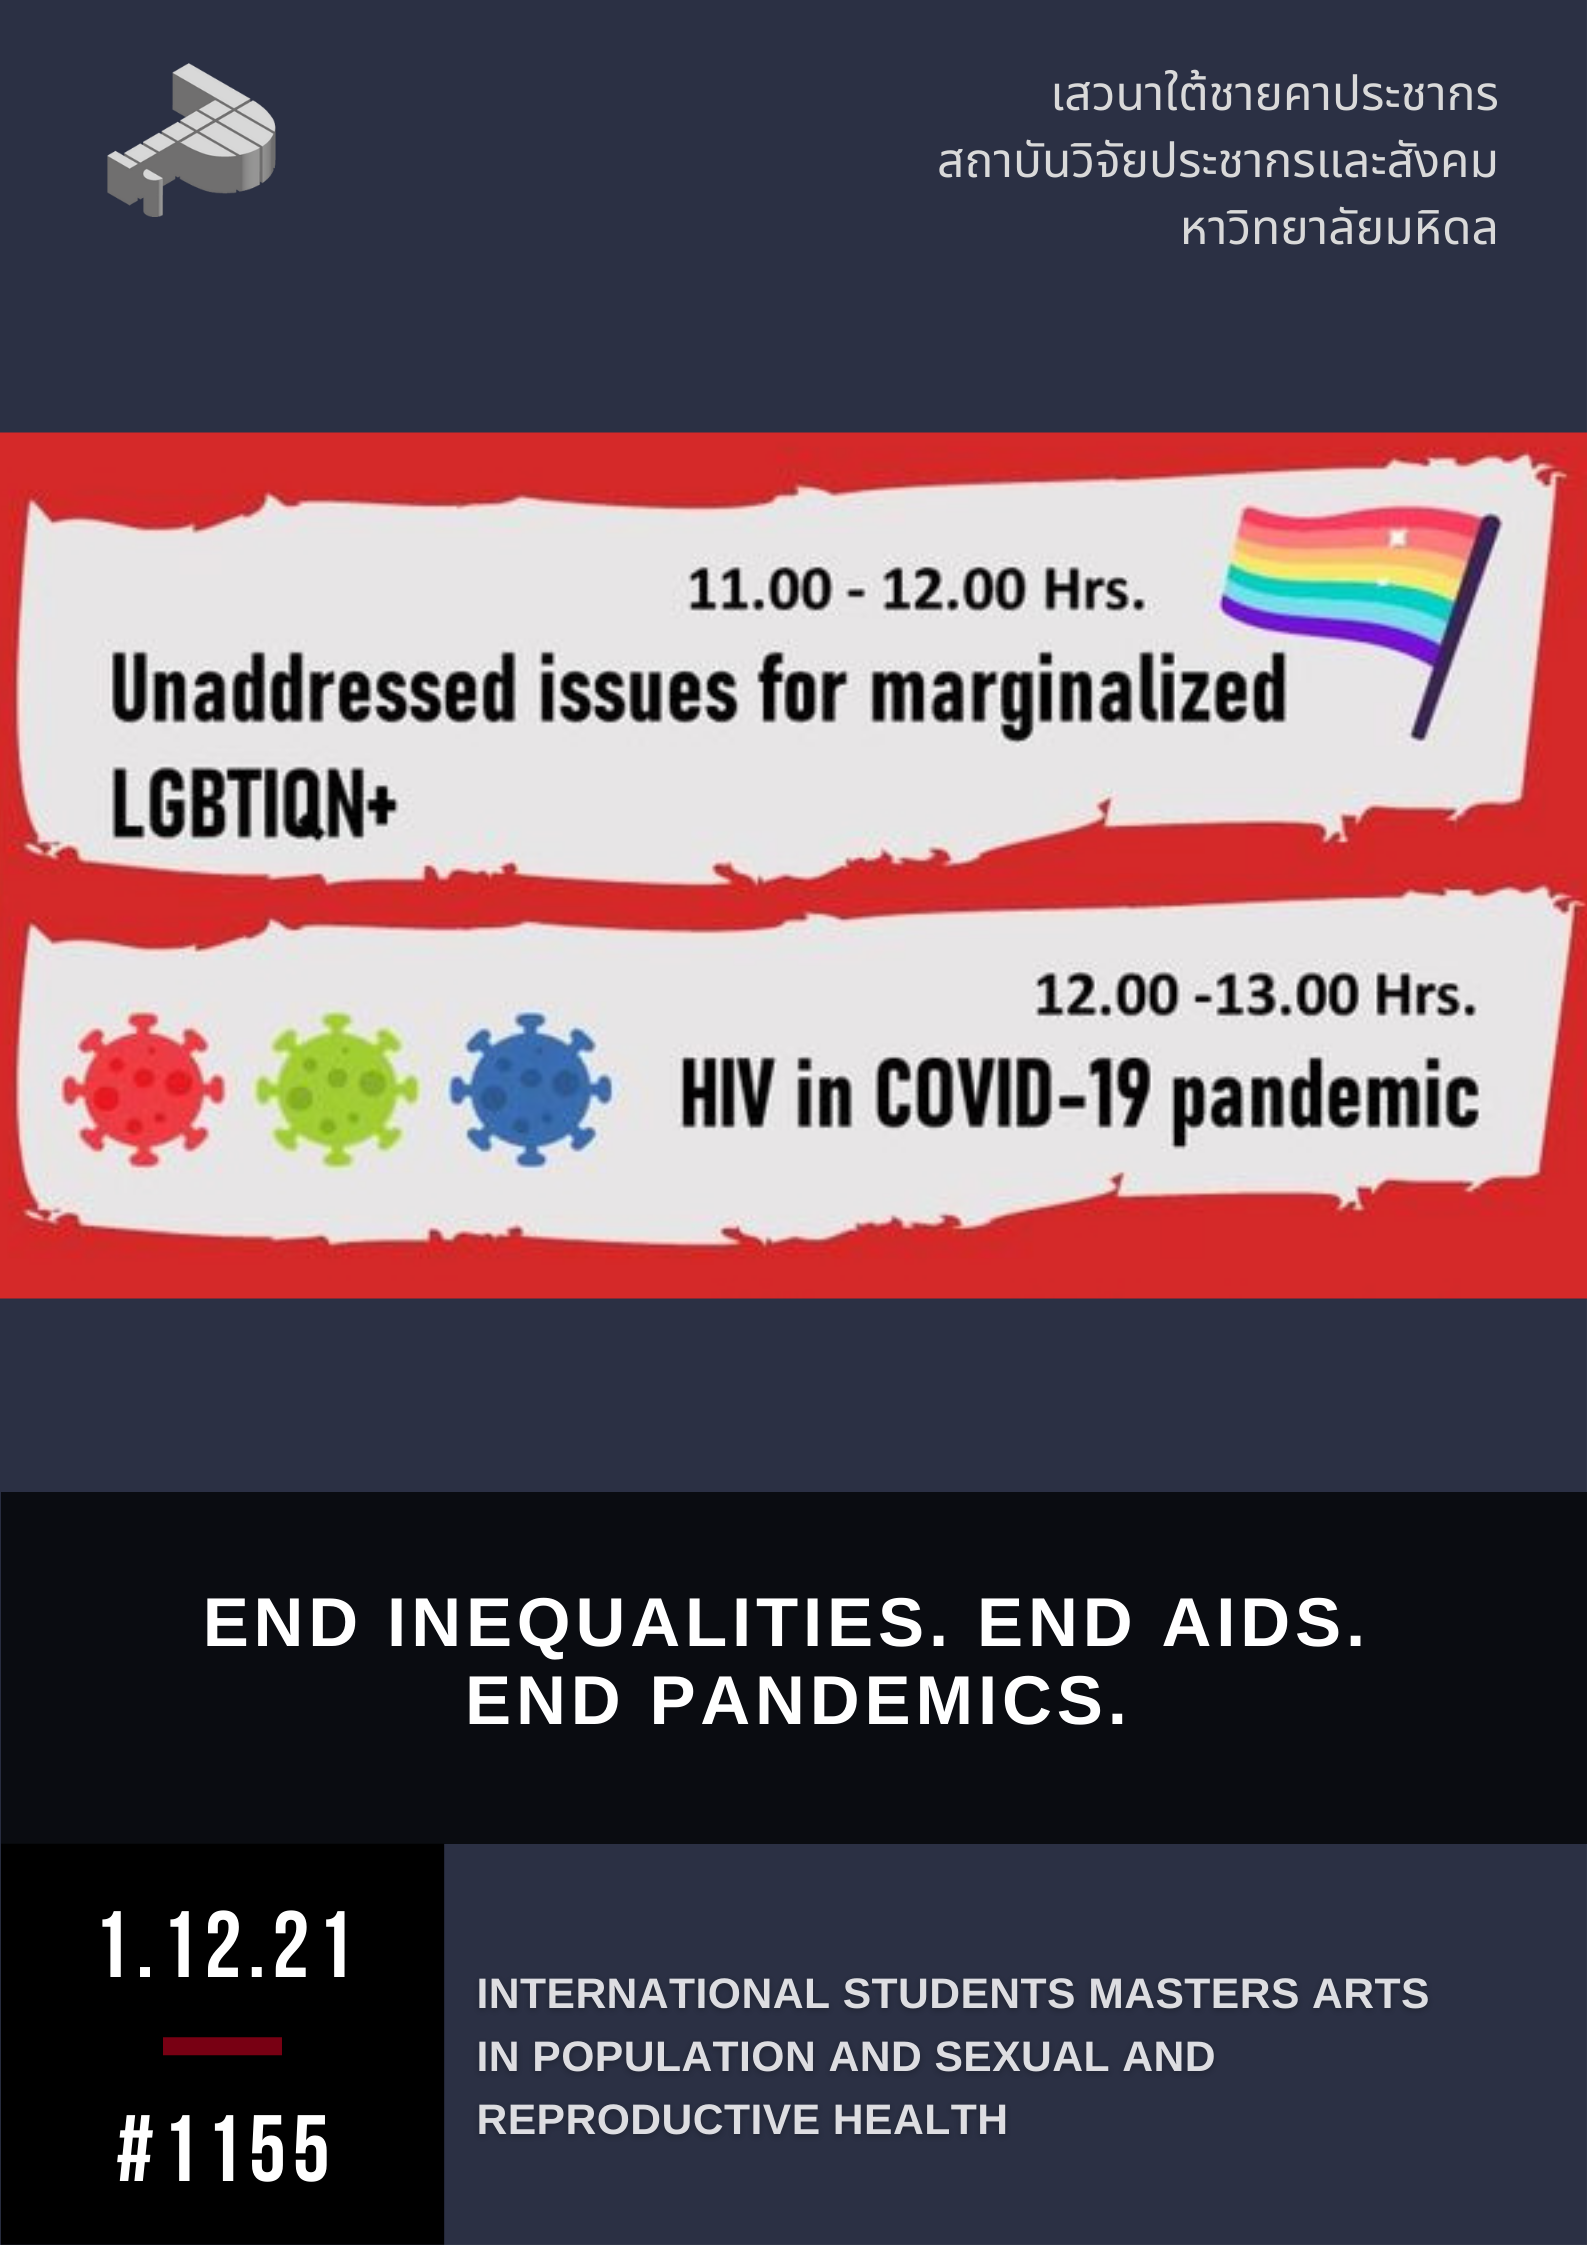 END INEQUALITIES. END AIDS. END PANDEMICS.